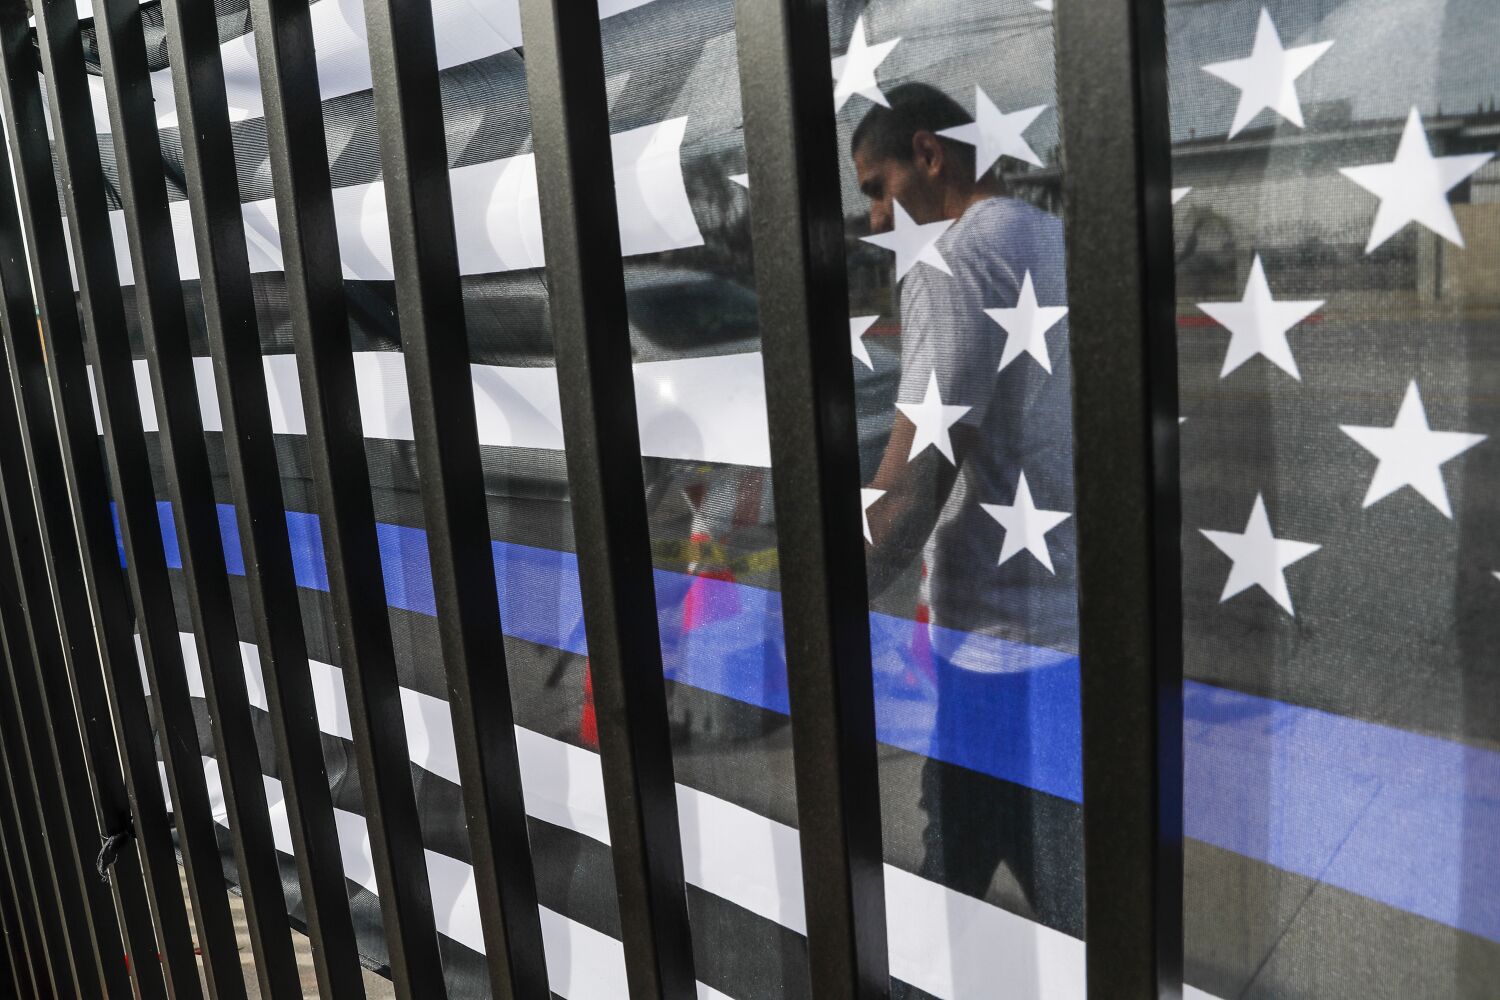 LAPD ban of 'thin blue line' flags is latest salvo in culture war